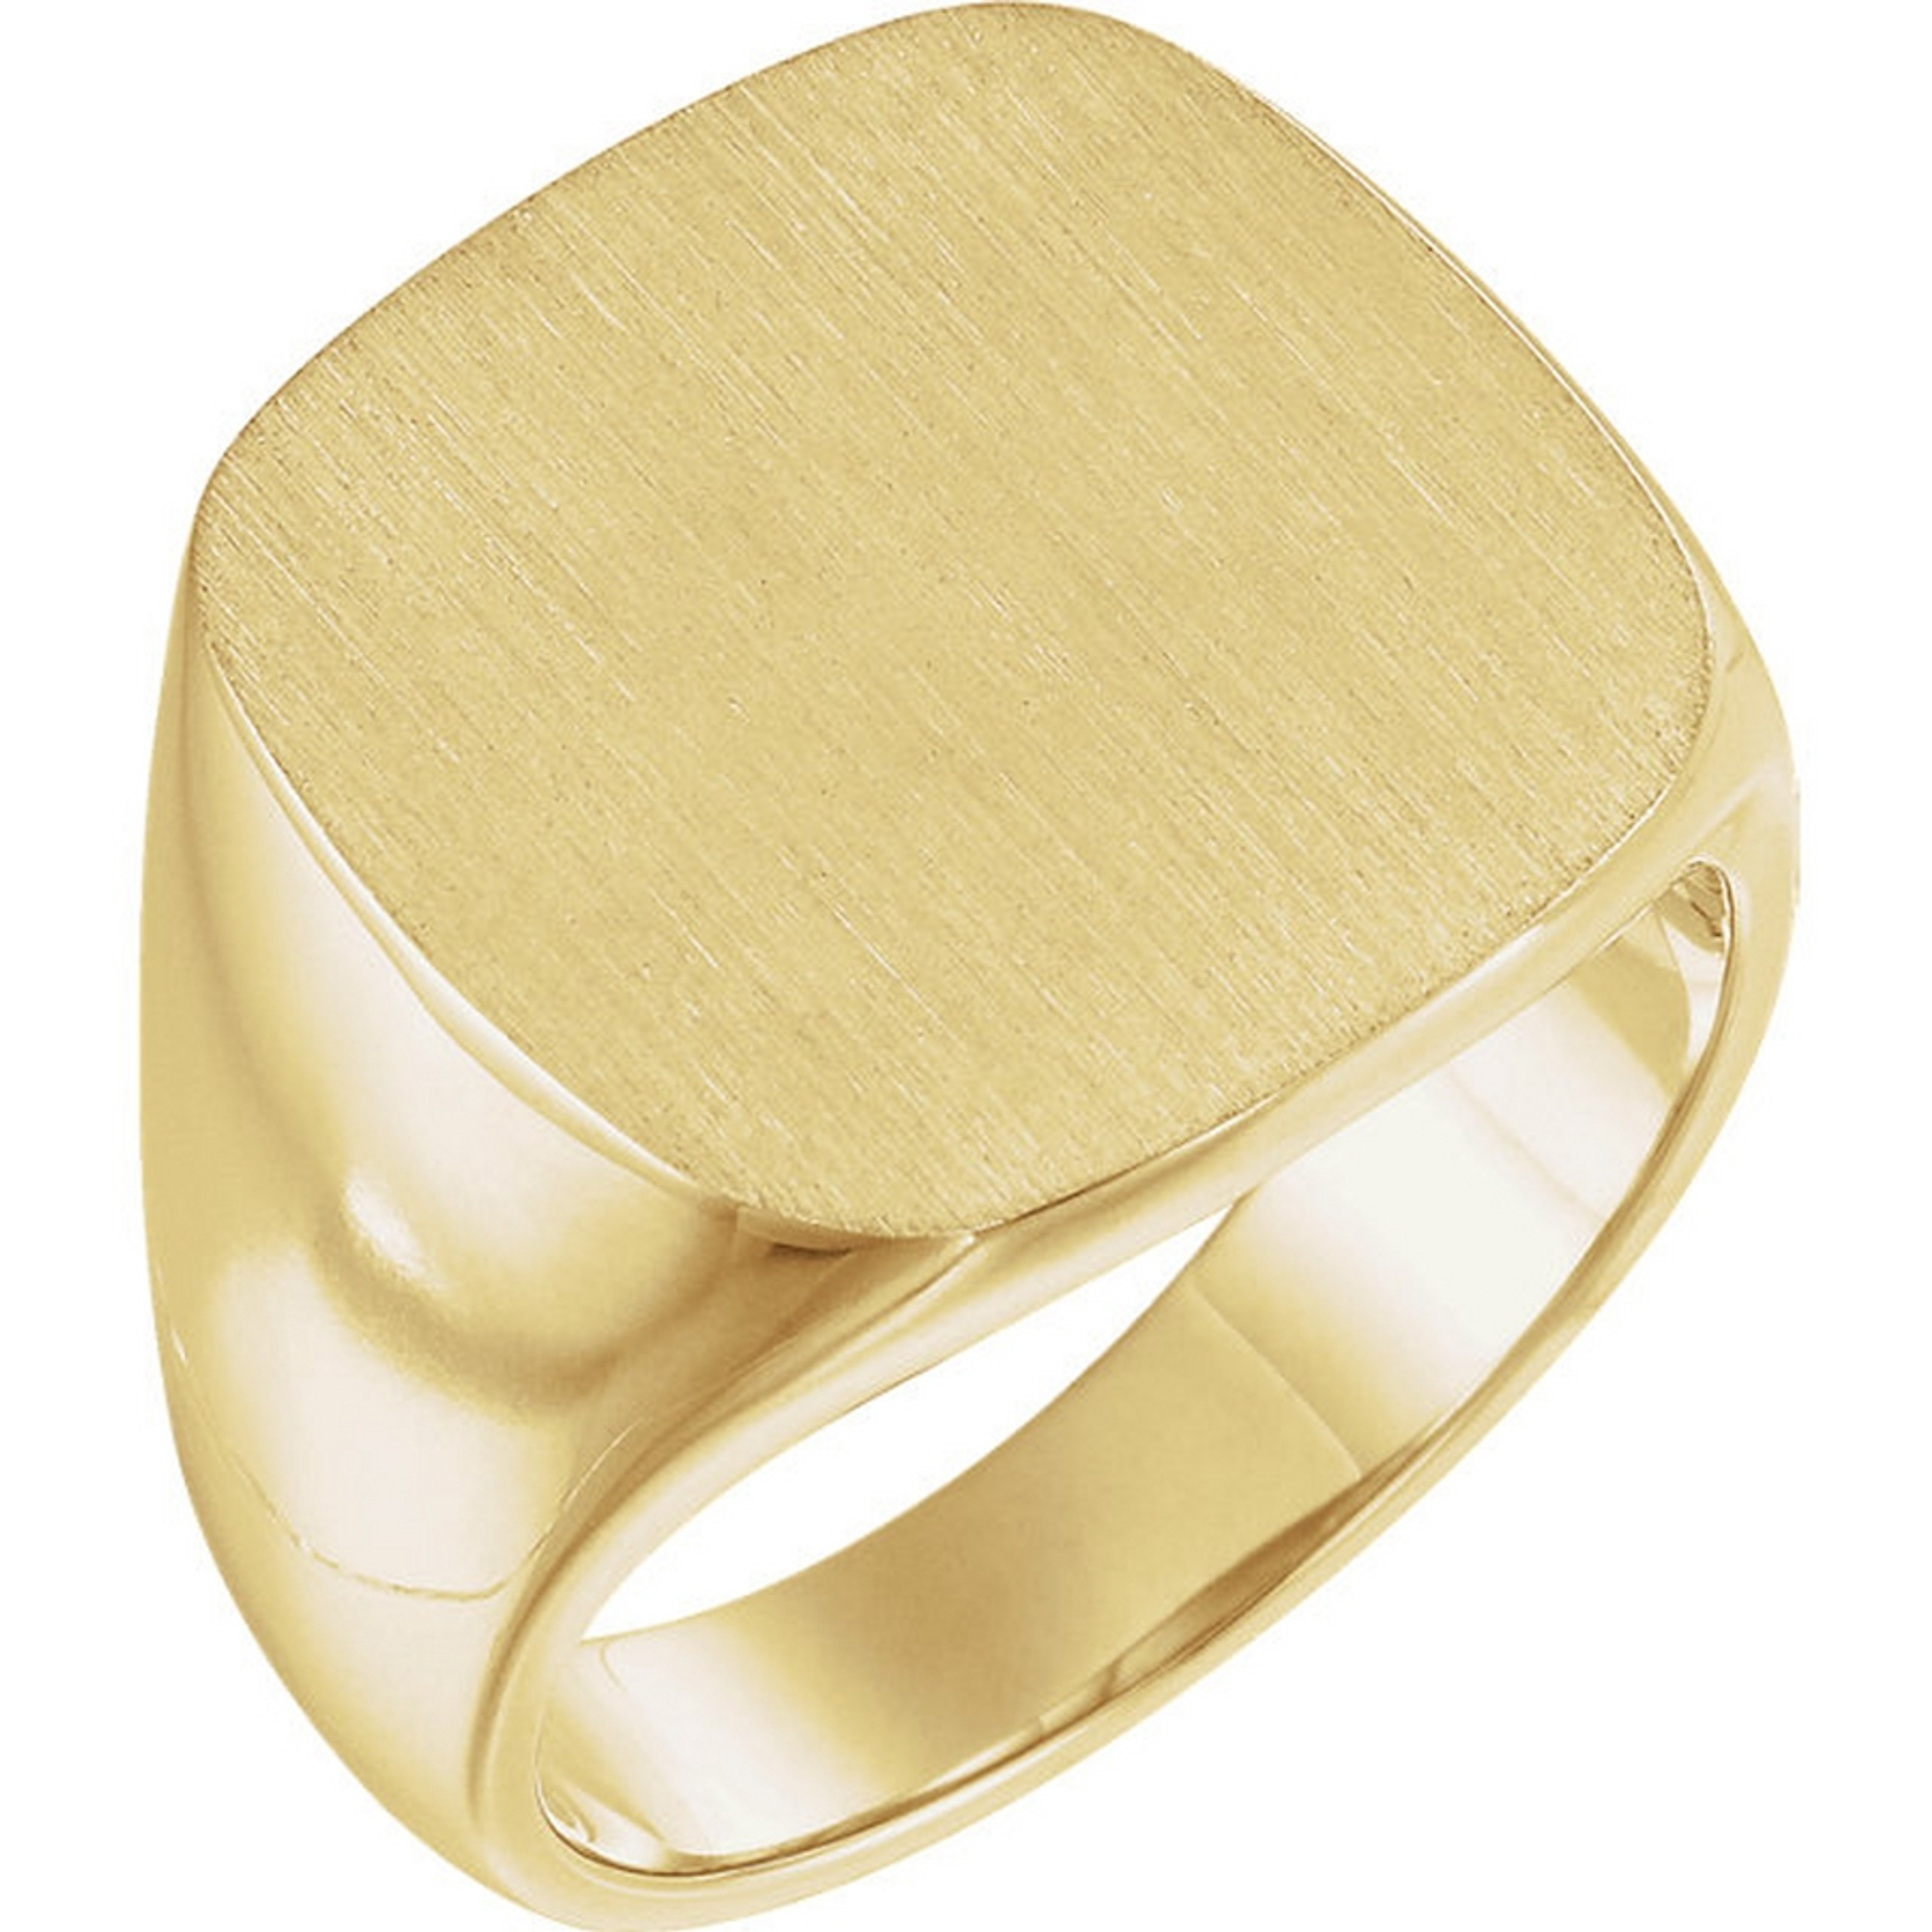 18k Yellow Gold Mens Solid Back Signet Ring  70770.1495508357 ?c=2